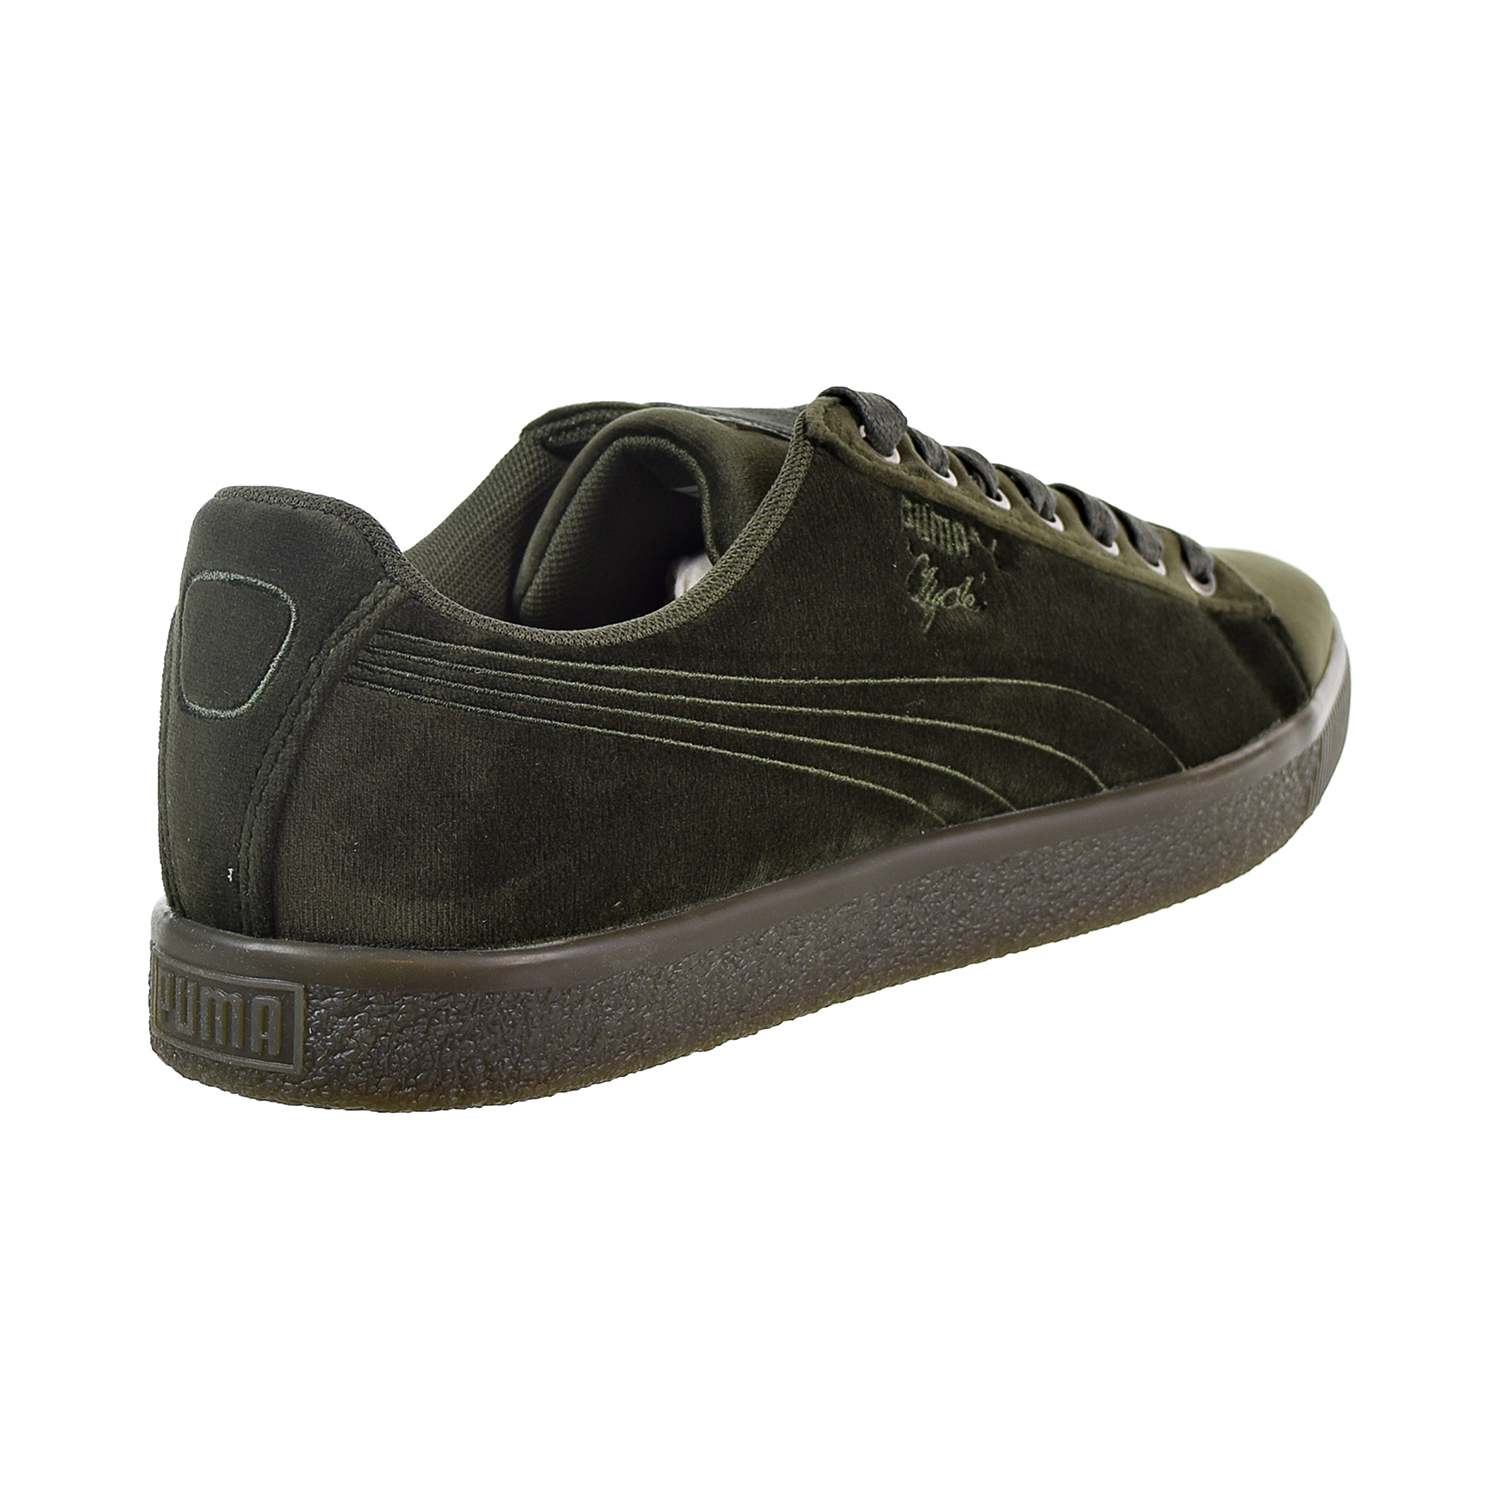 Puma clyde Velour Ice Men's Shoes Olive Green 366549-03 - image 3 of 6